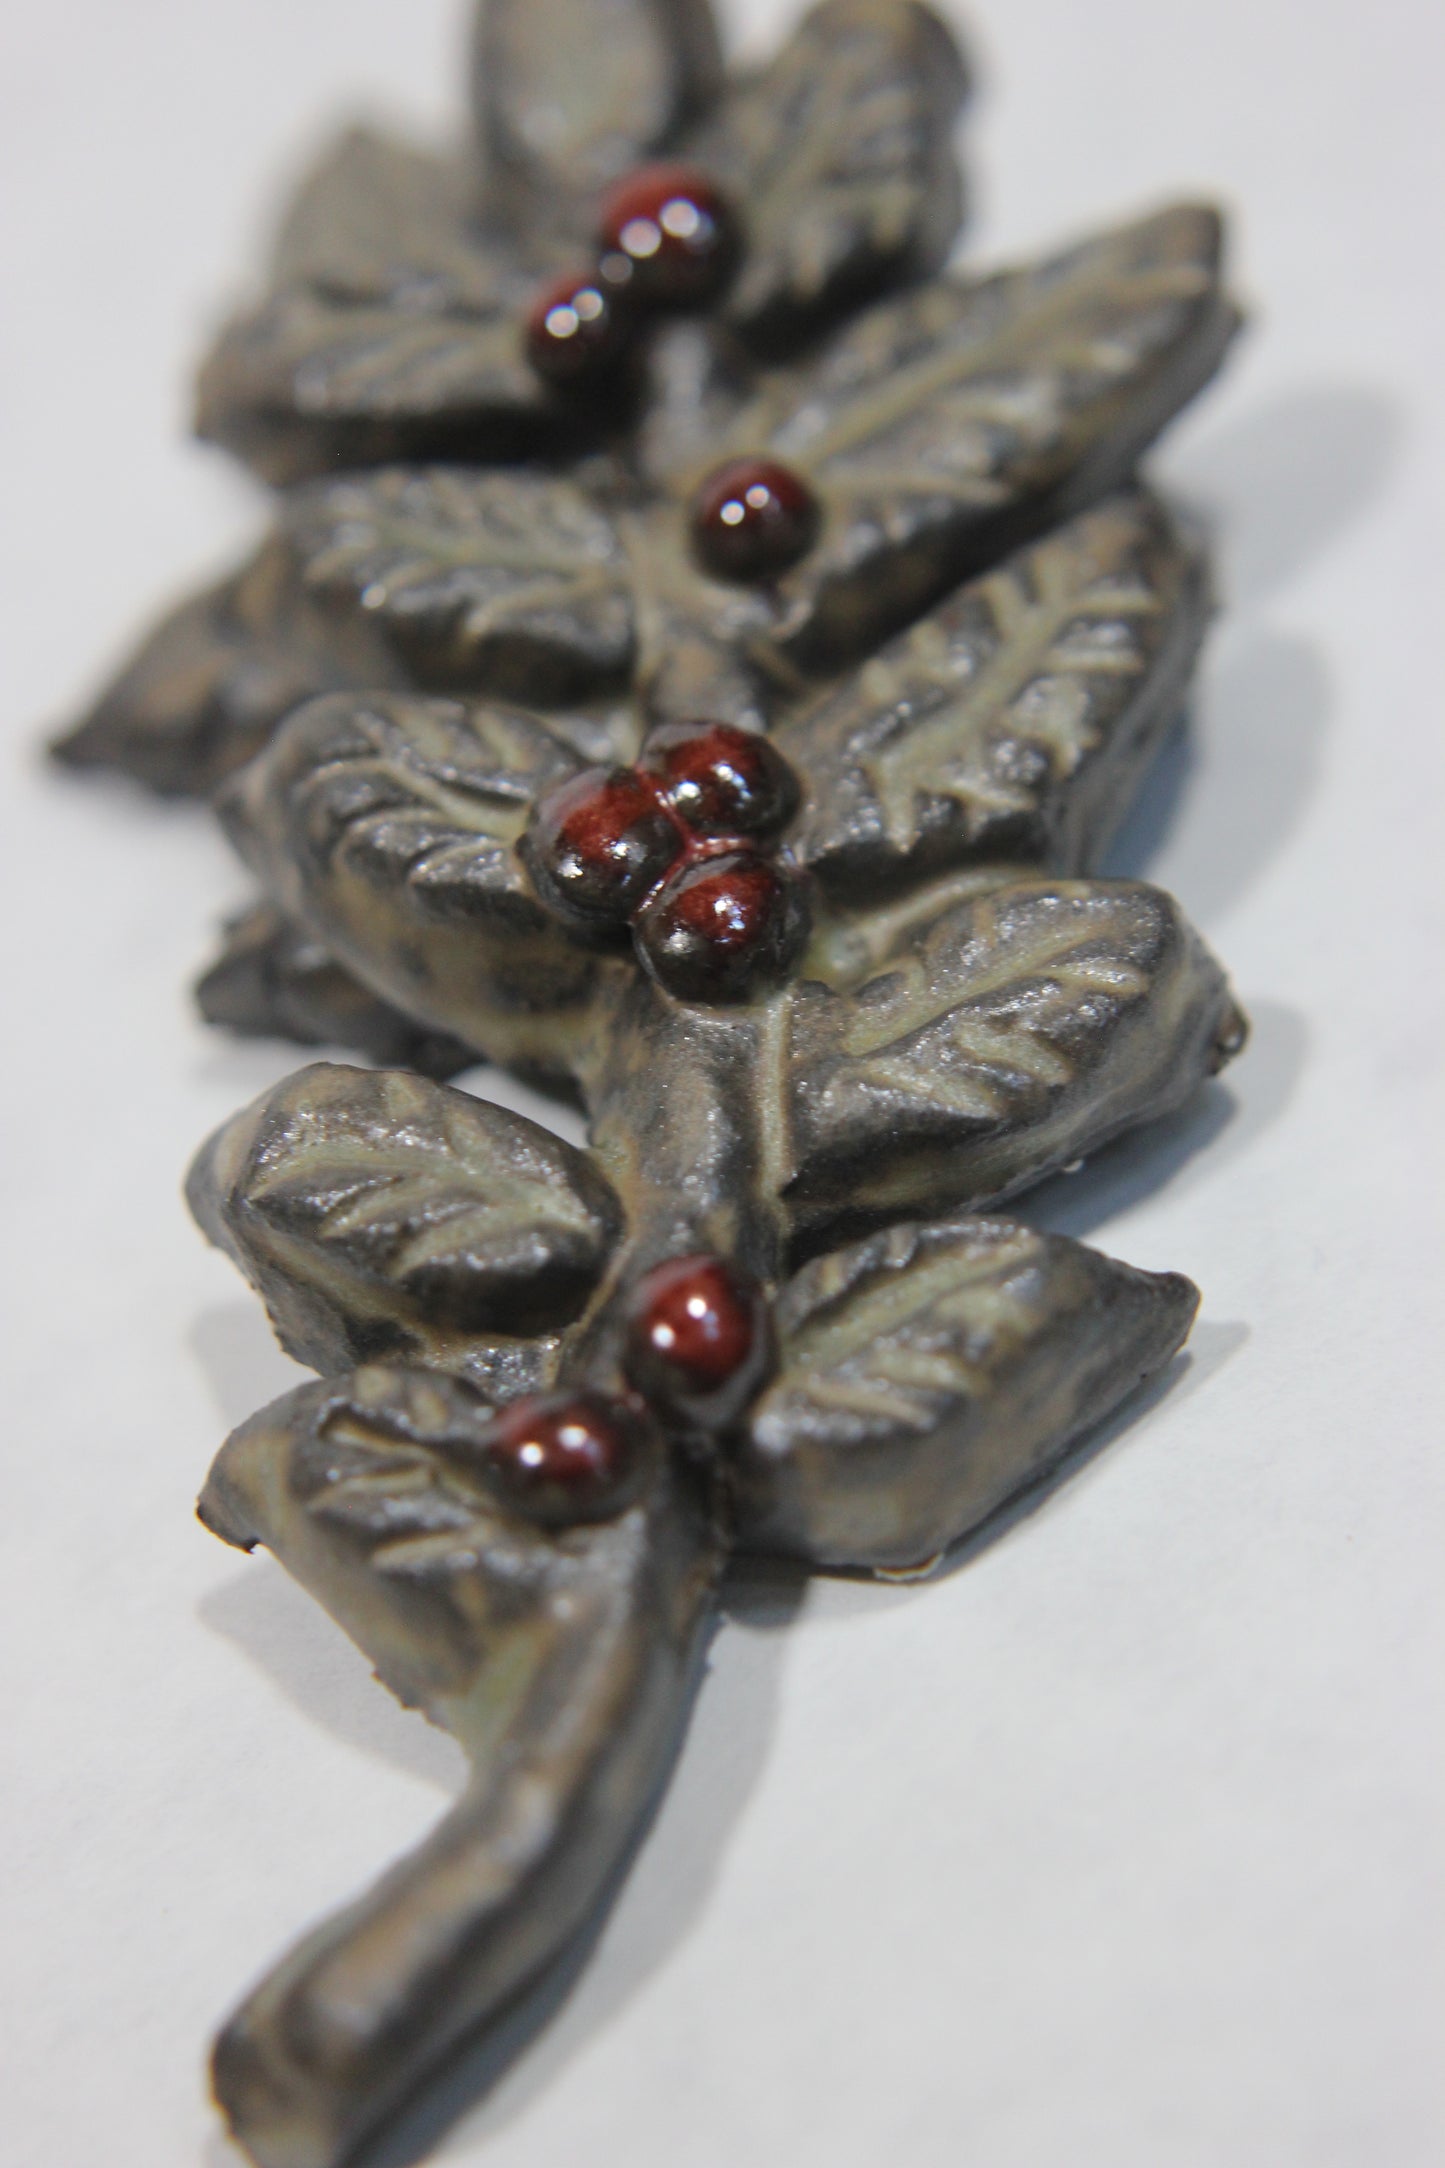 Small Ceramic Leaf with Berries Tiles for Mosaics and Home Decor